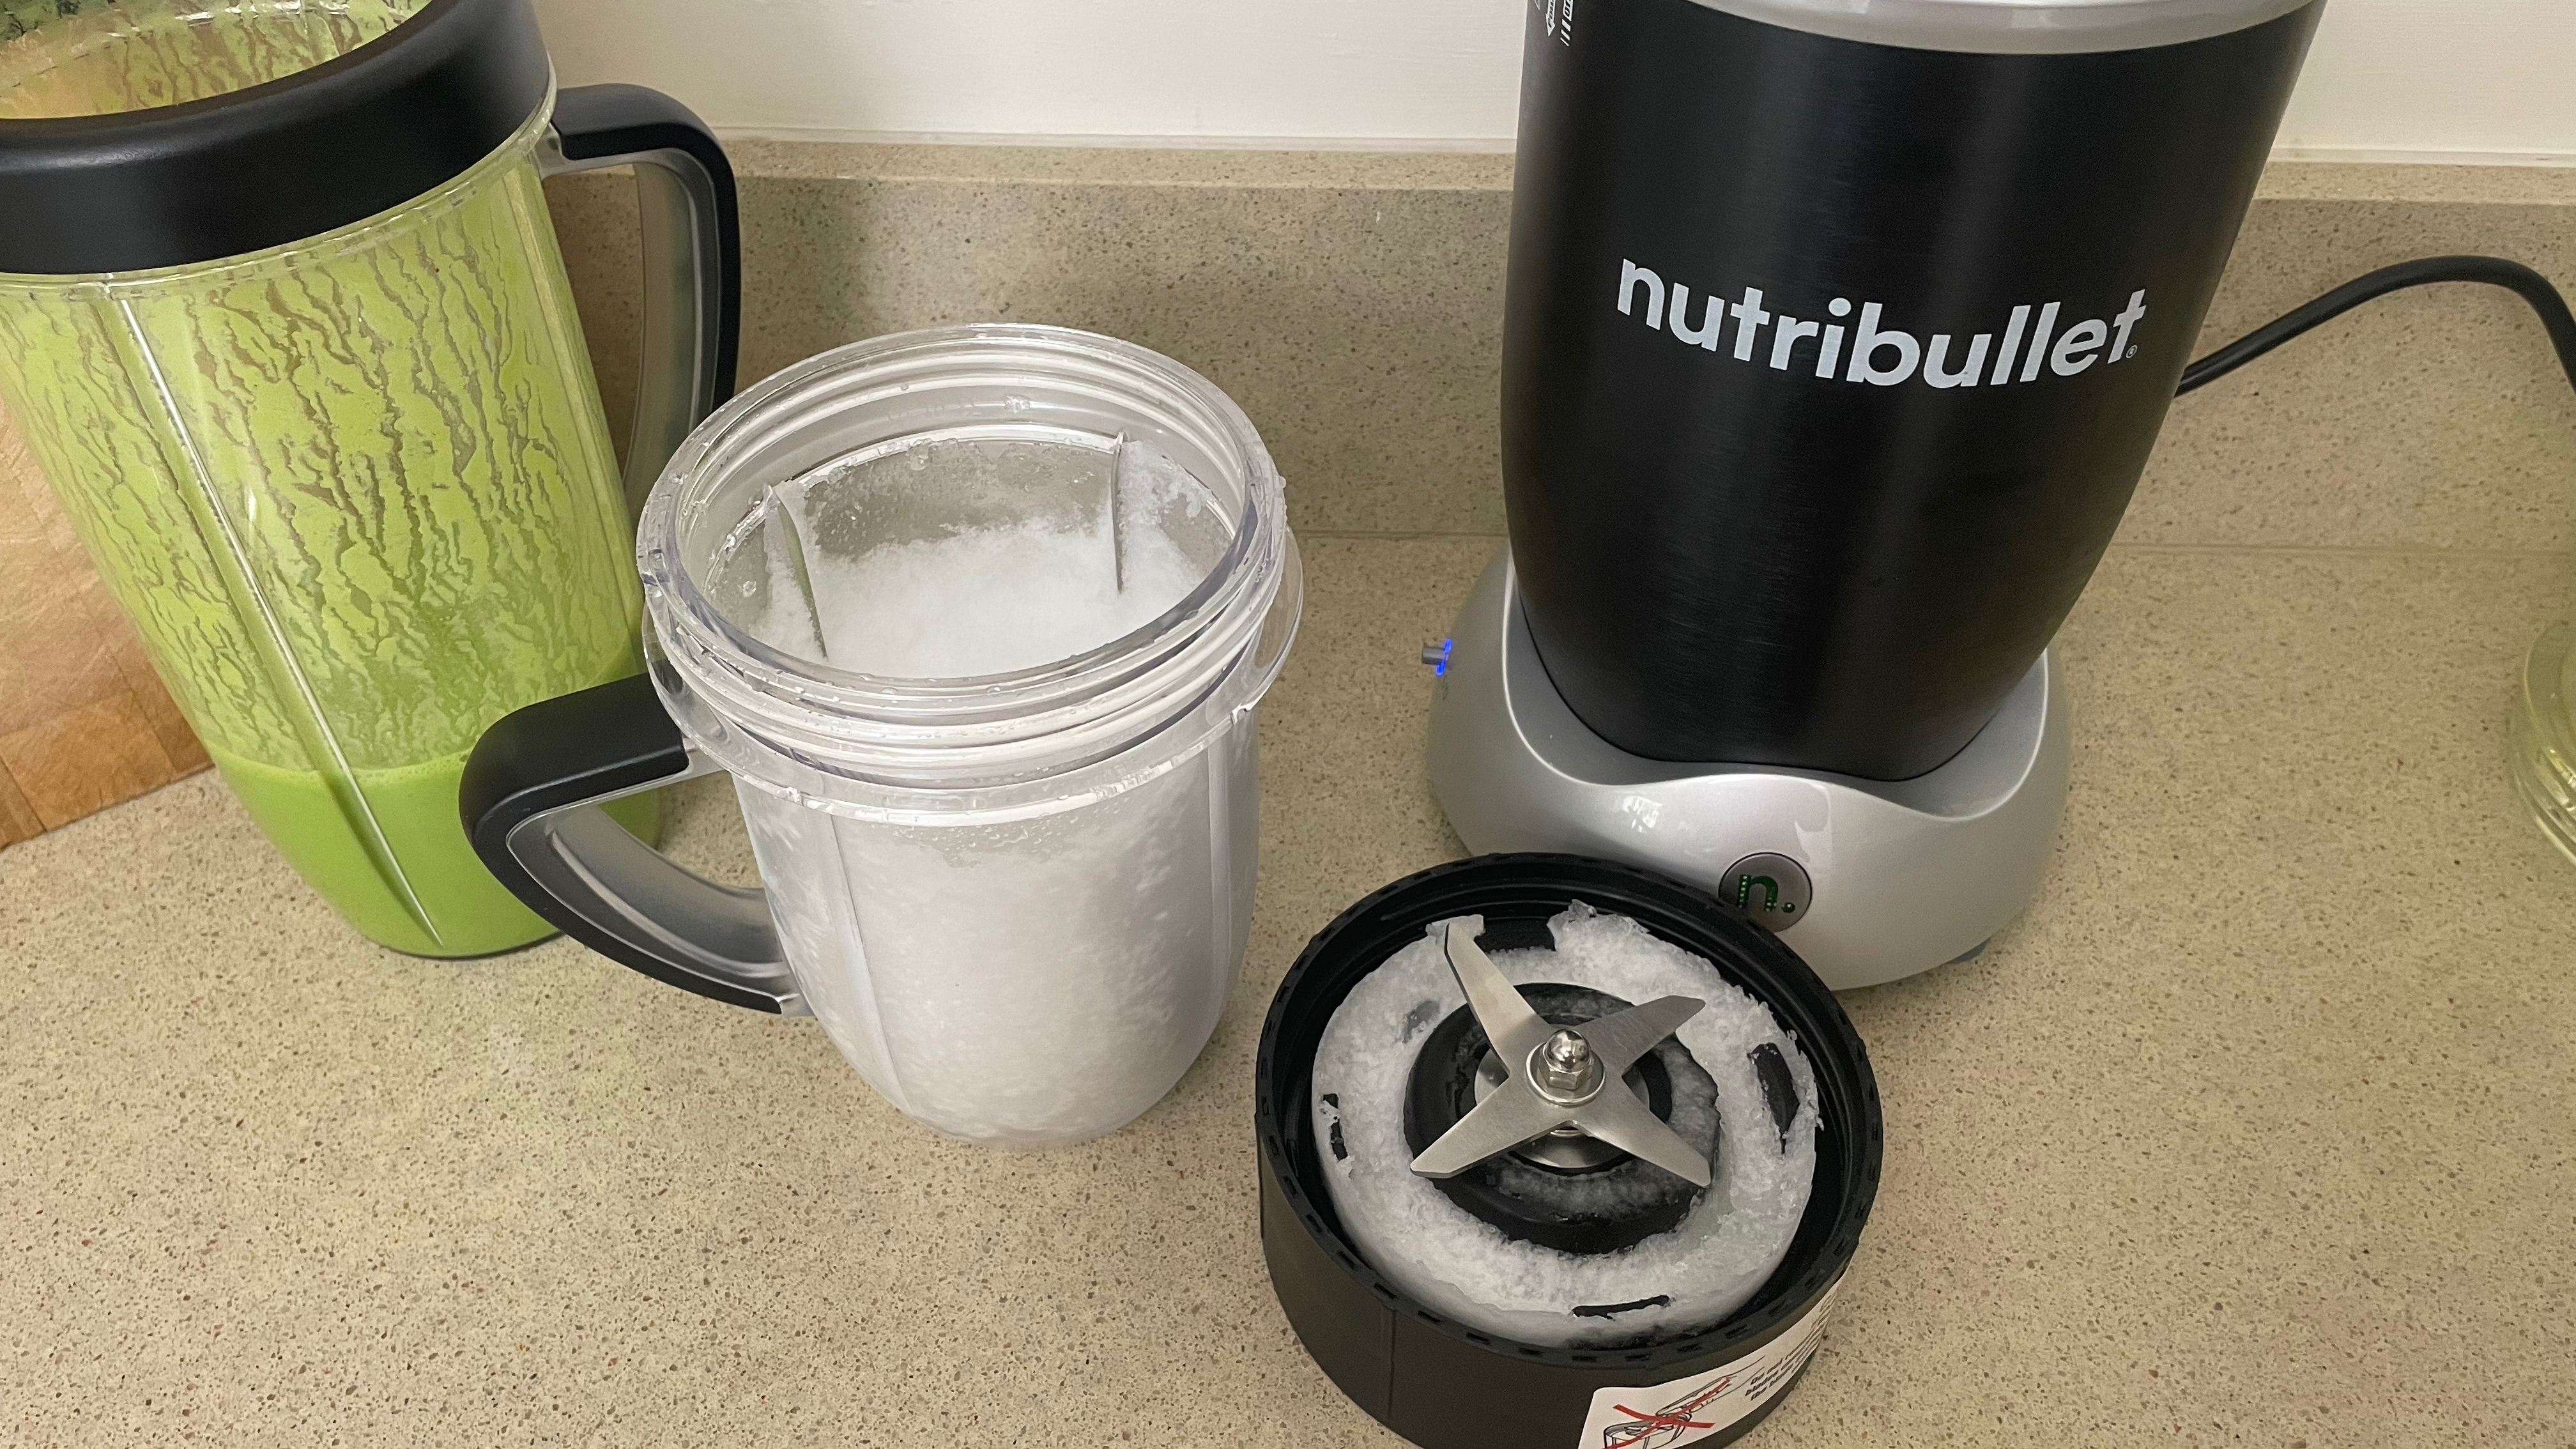 Crushed ice next to the Nutribullet Rx. The ice is mostly finely blended, with some larger chunks